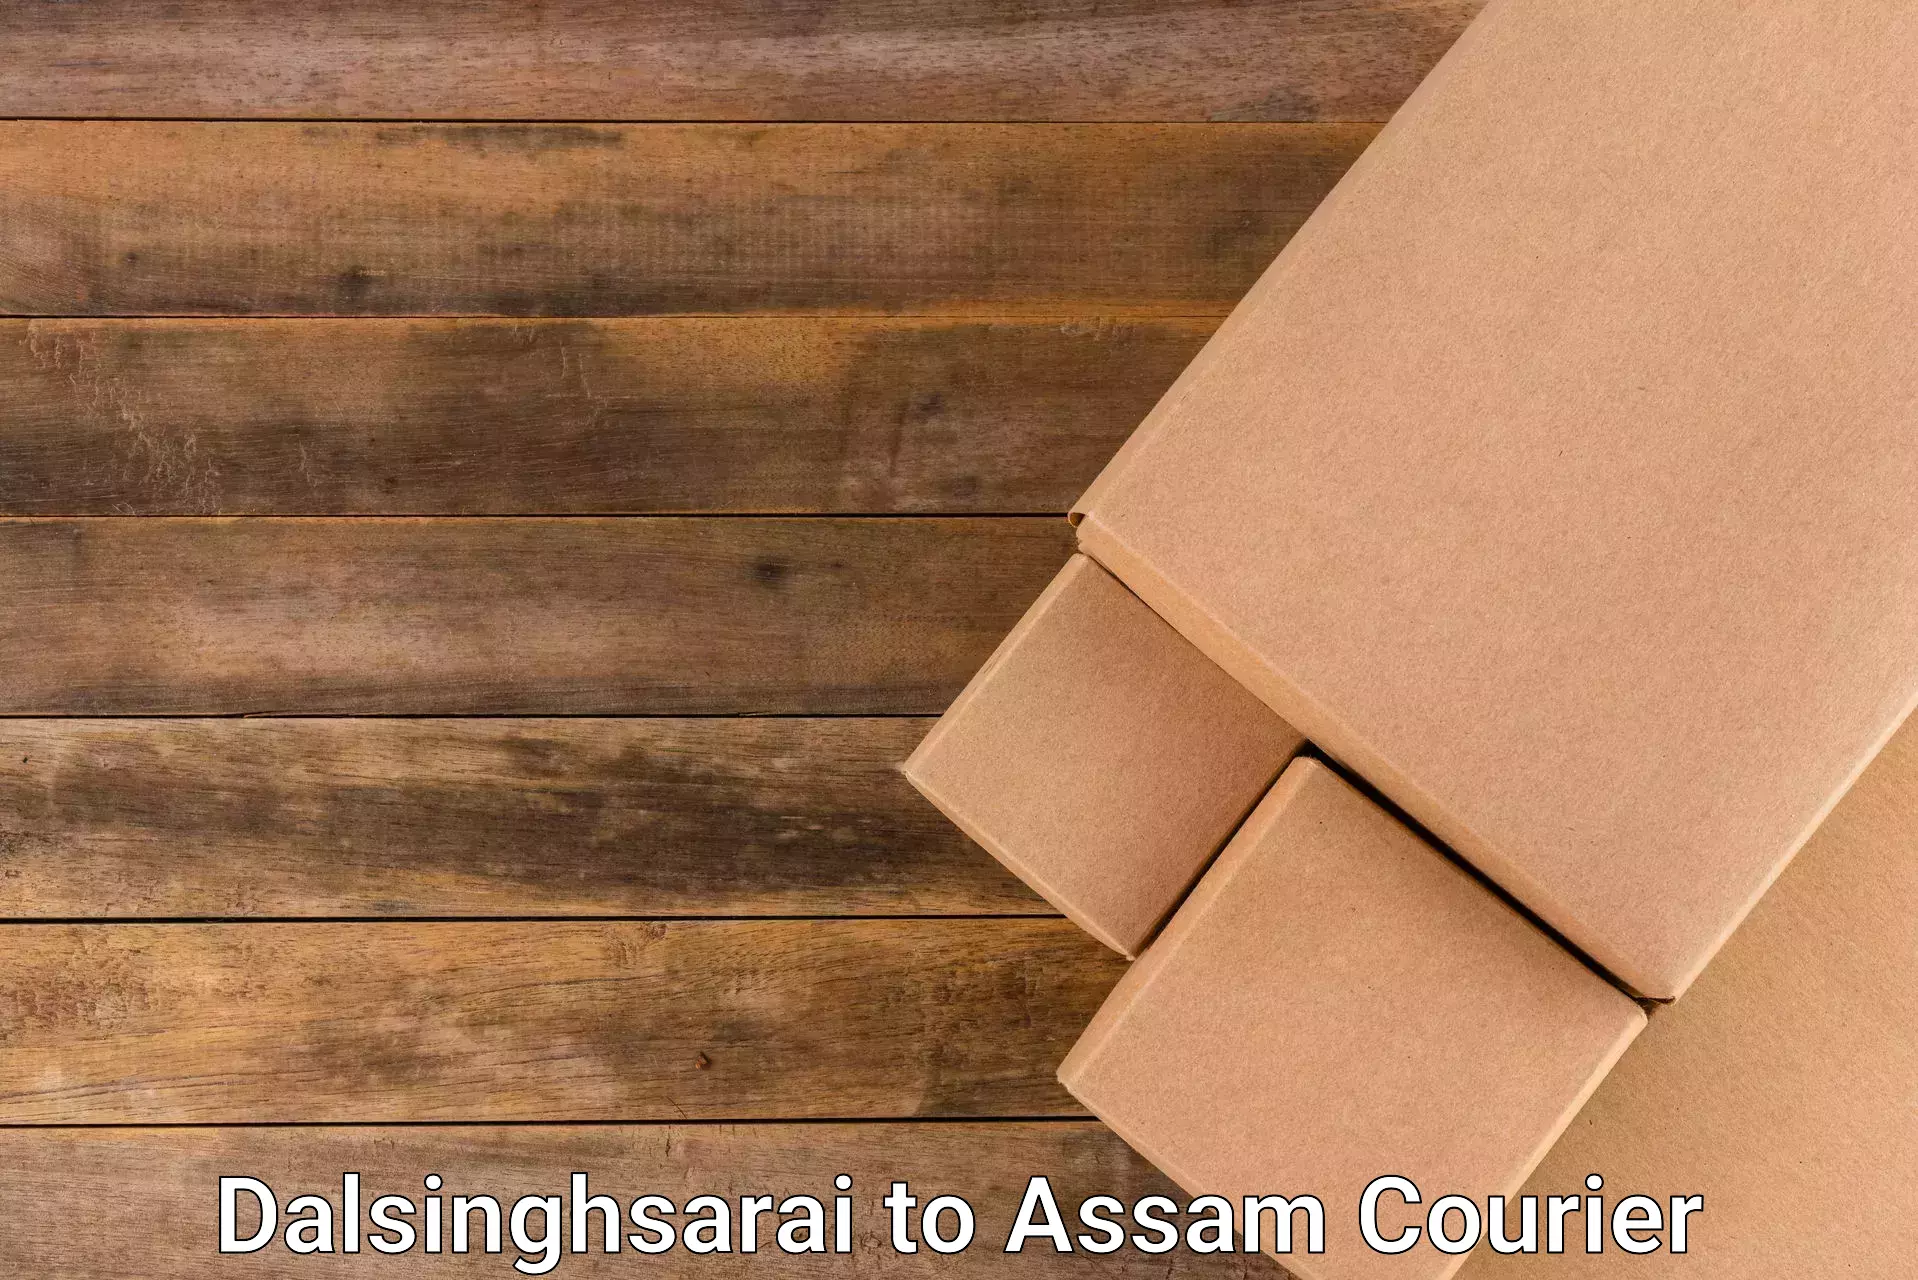 Full-service courier options Dalsinghsarai to Moranhat